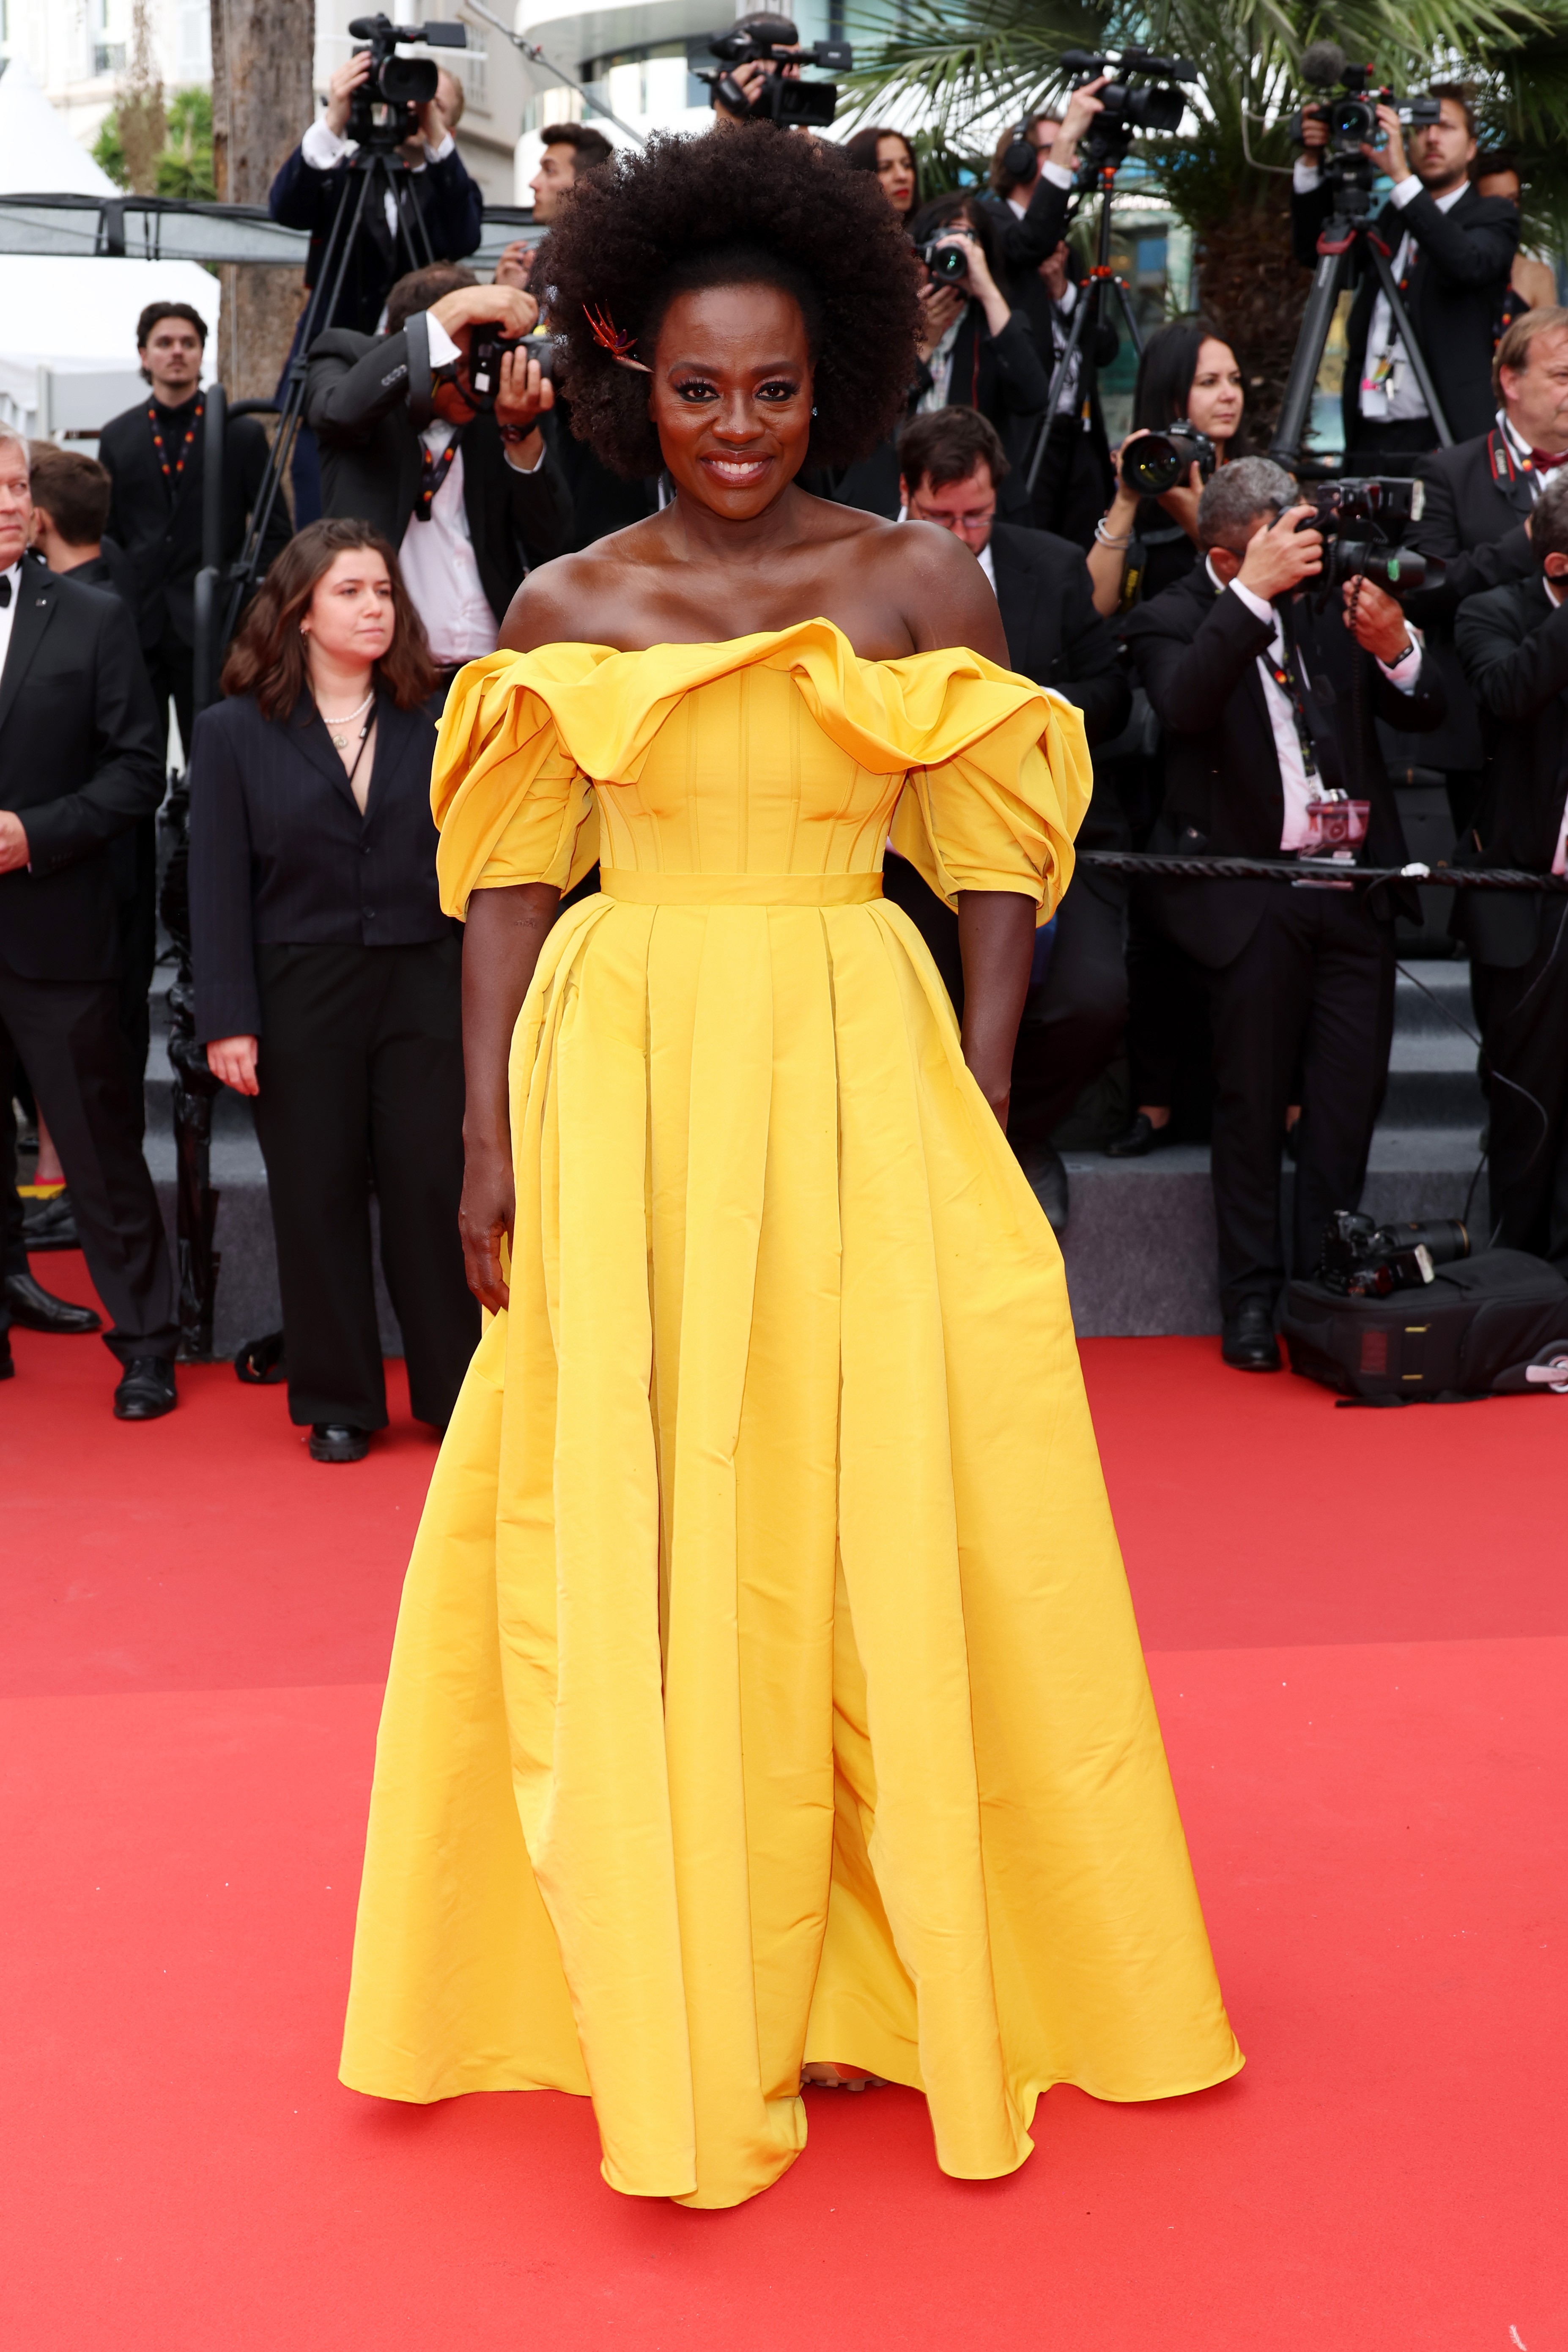 CANNES, FRANCE - MAY 18: Viola Davis attends the screening of "Top Gun: Maverick" during the 75th annual Cannes film festival at Palais des Festivals on May 18, 2022 in Cannes, France. (Photo by Daniele Venturelli/WireImage) (Foto: WireImage)